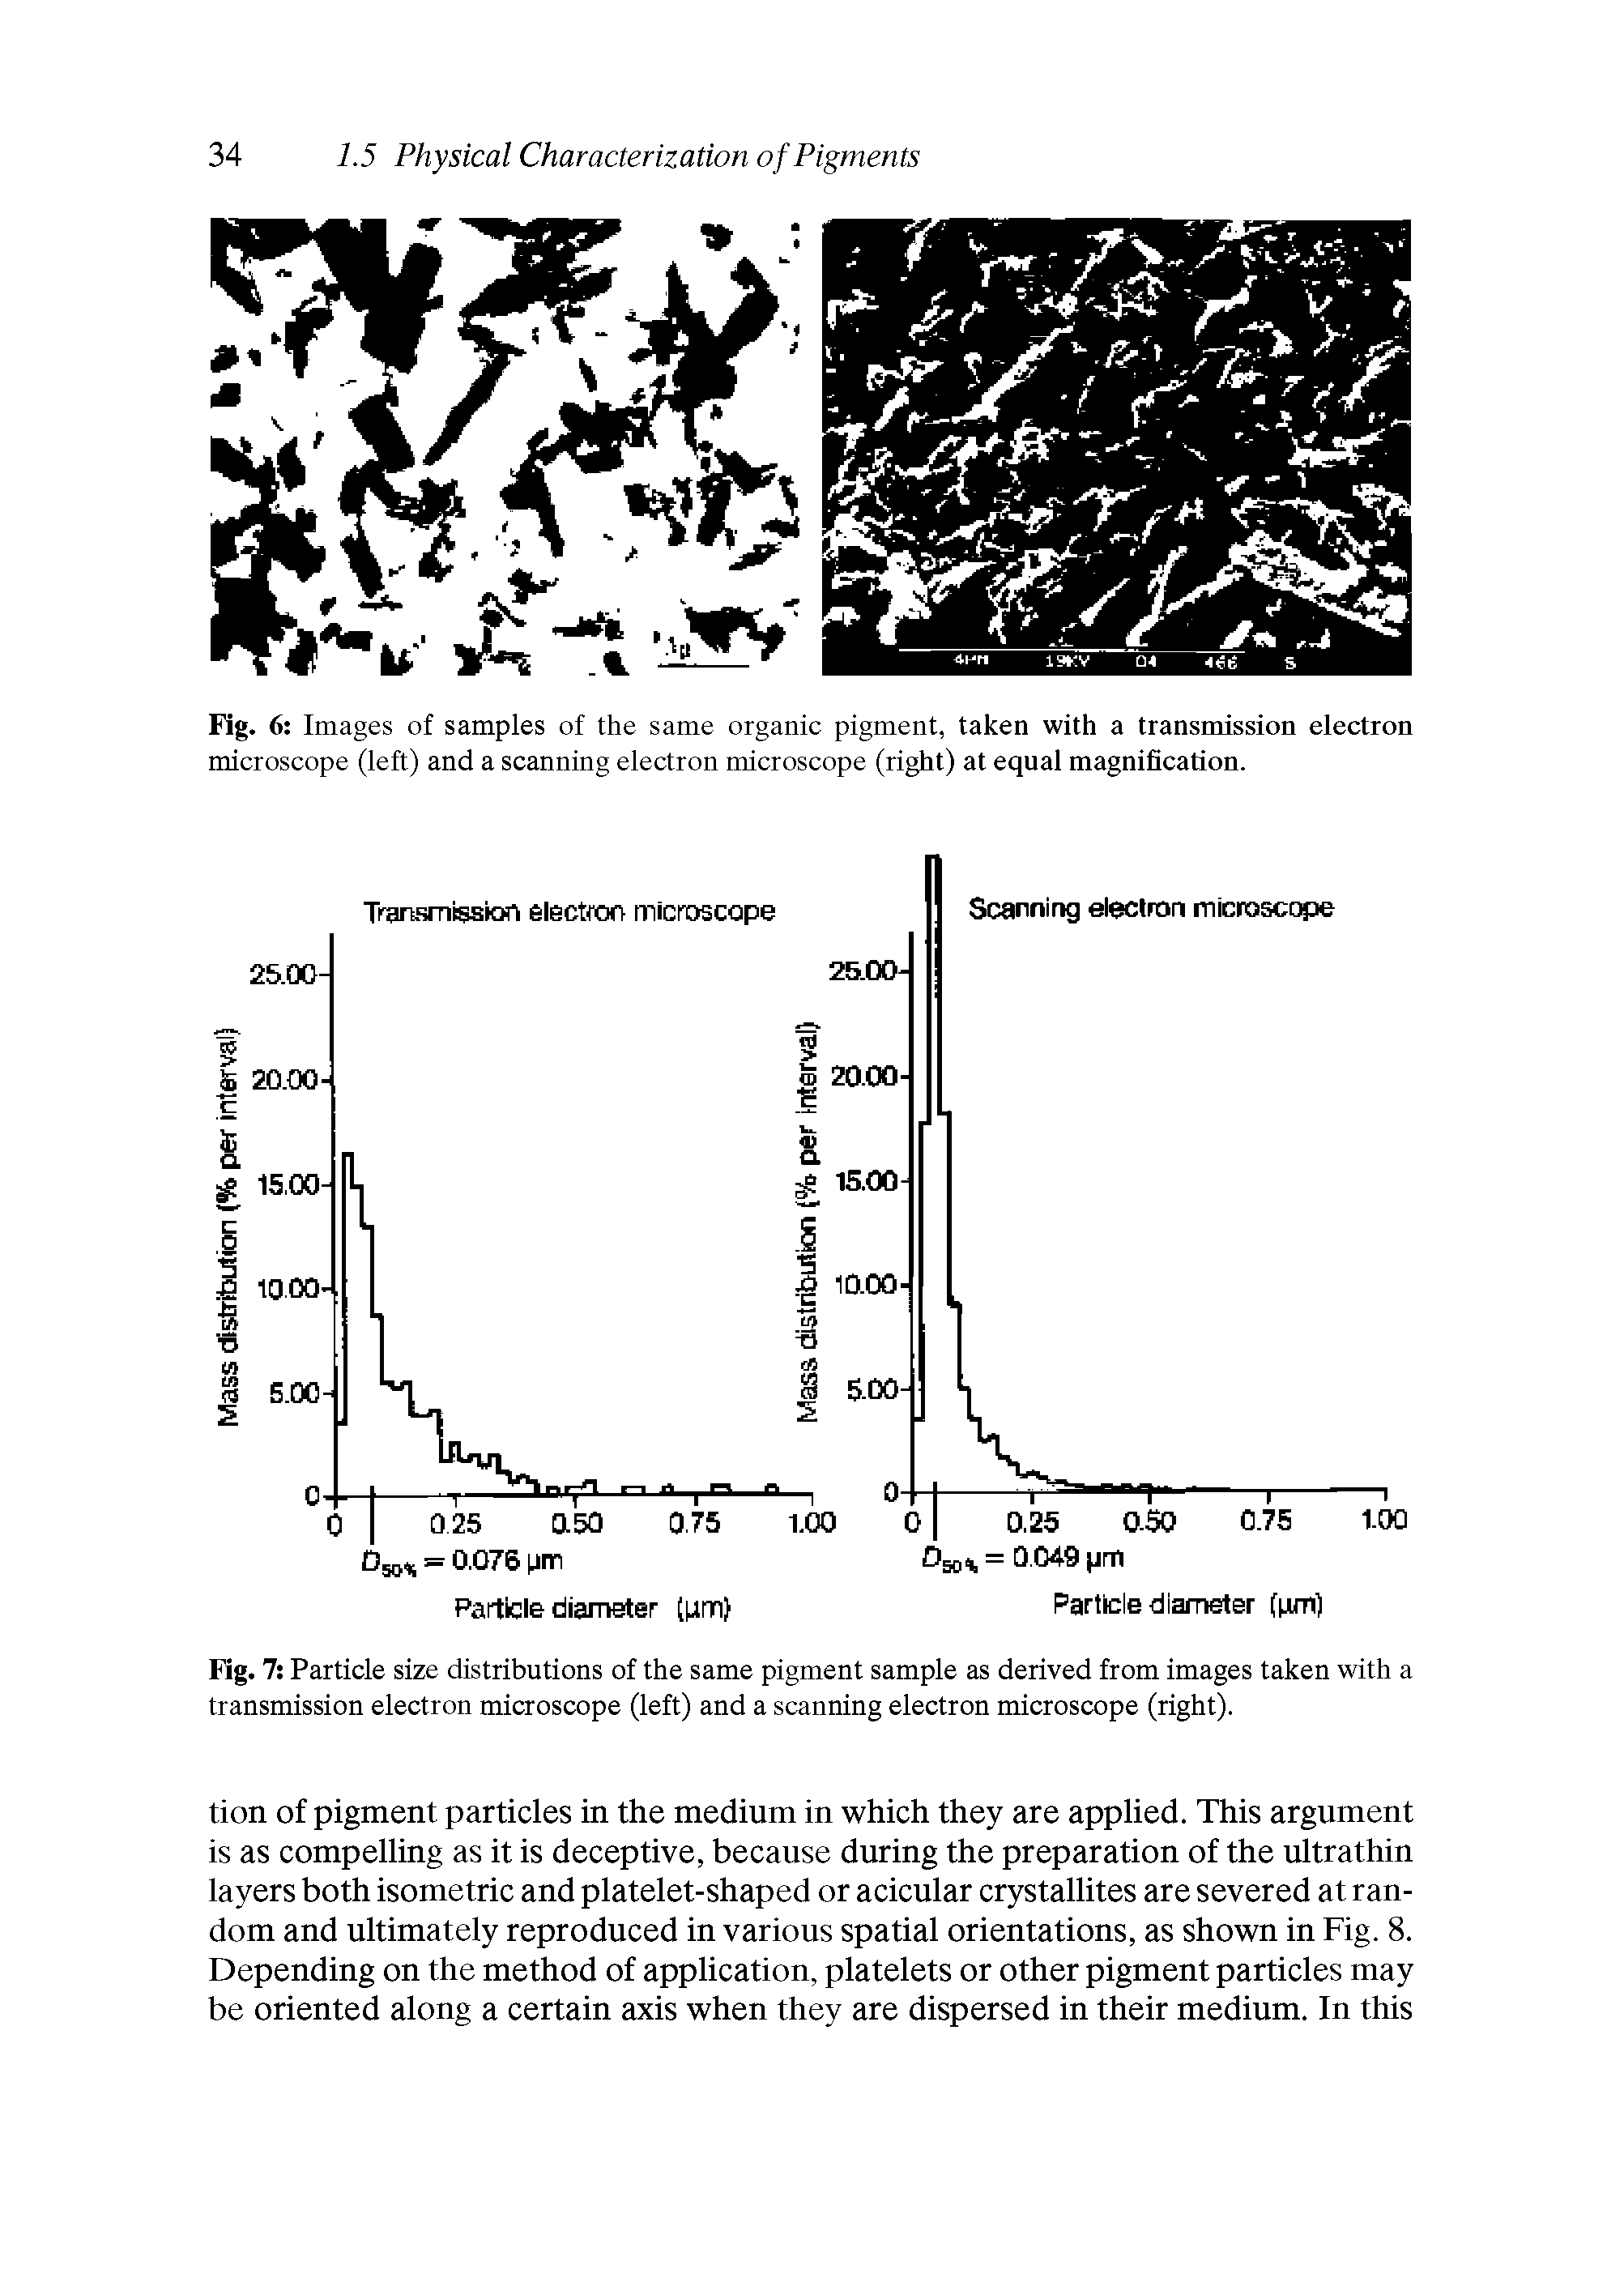 Fig. 7 Particle size distributions of the same pigment sample as derived from images taken with a transmission electron microscope (left) and a scanning electron microscope (right).